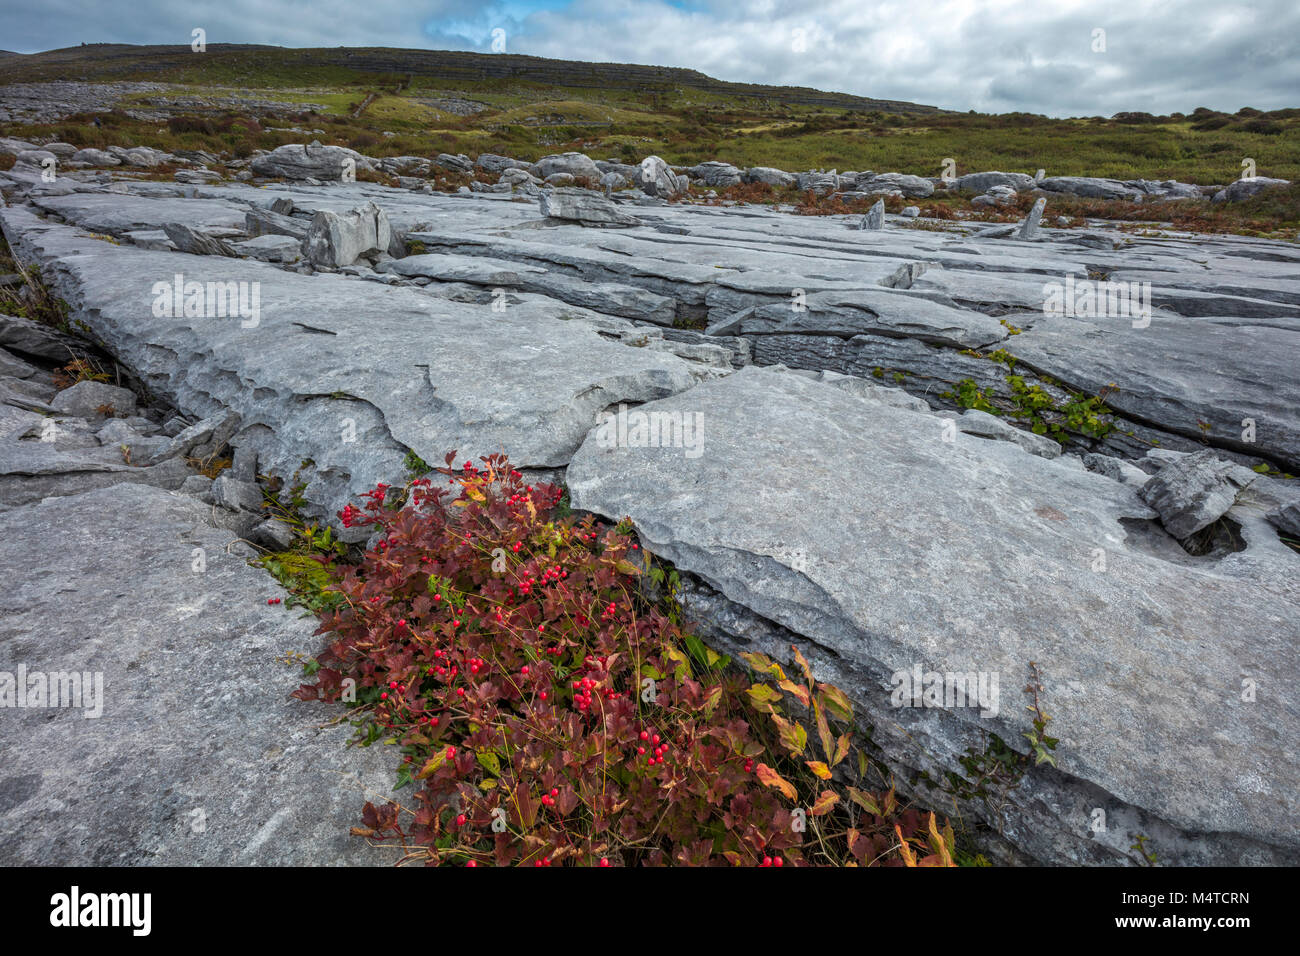 Guelder rose growing in a grike between limestone pavement, The Burren, County Clare, Ireland. Stock Photo